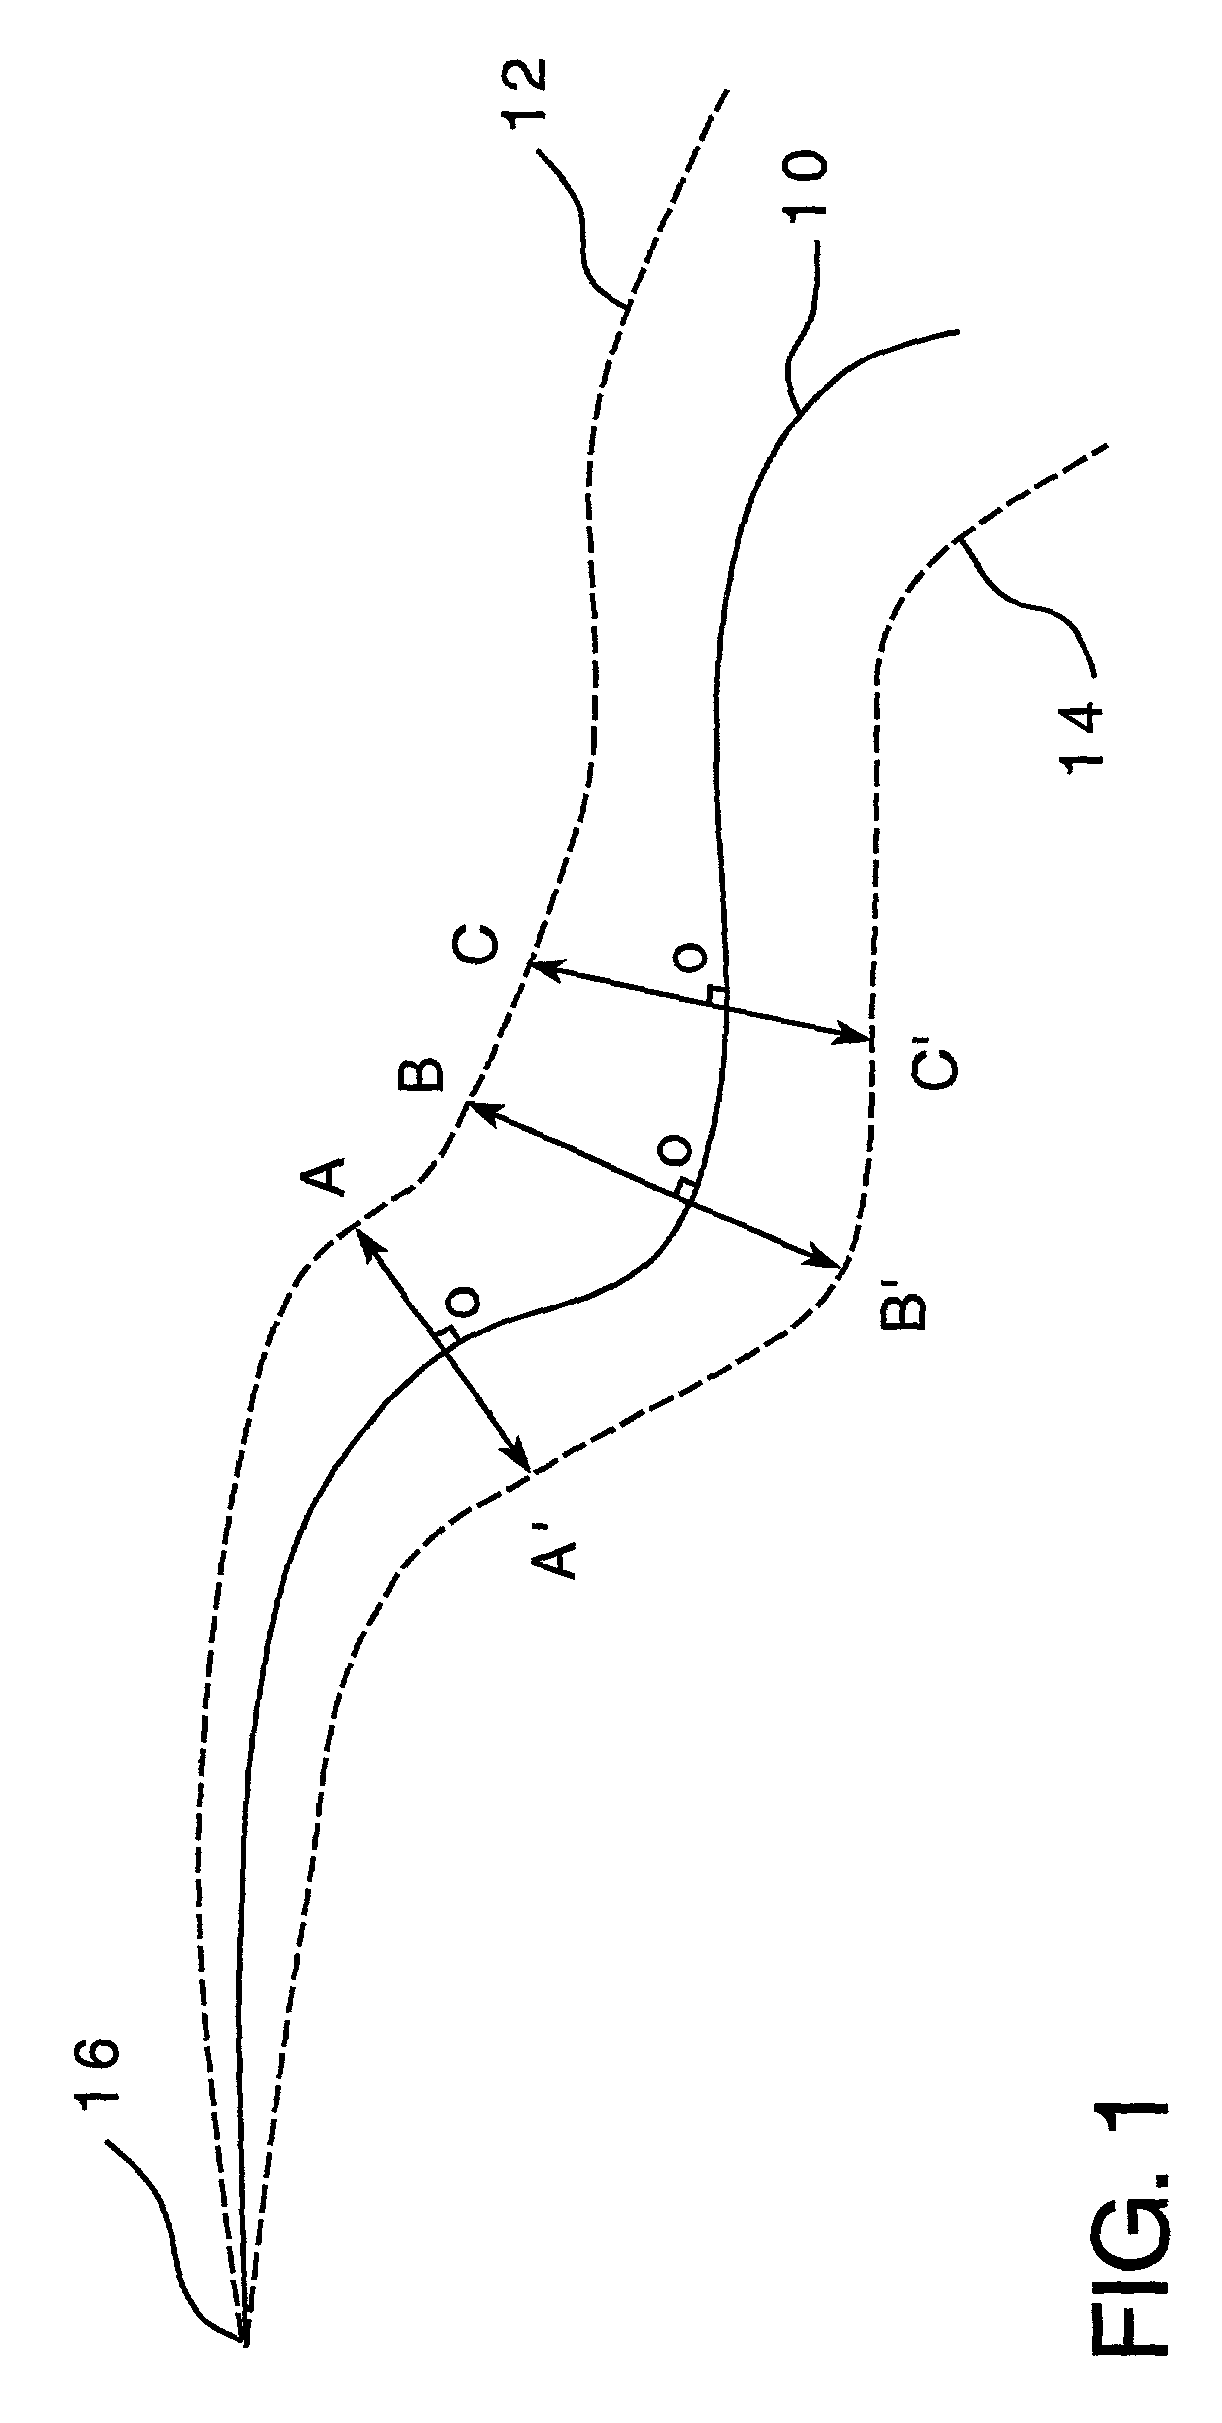 Method for determining a die profile for forming a metal part having a desired shape and associated methods